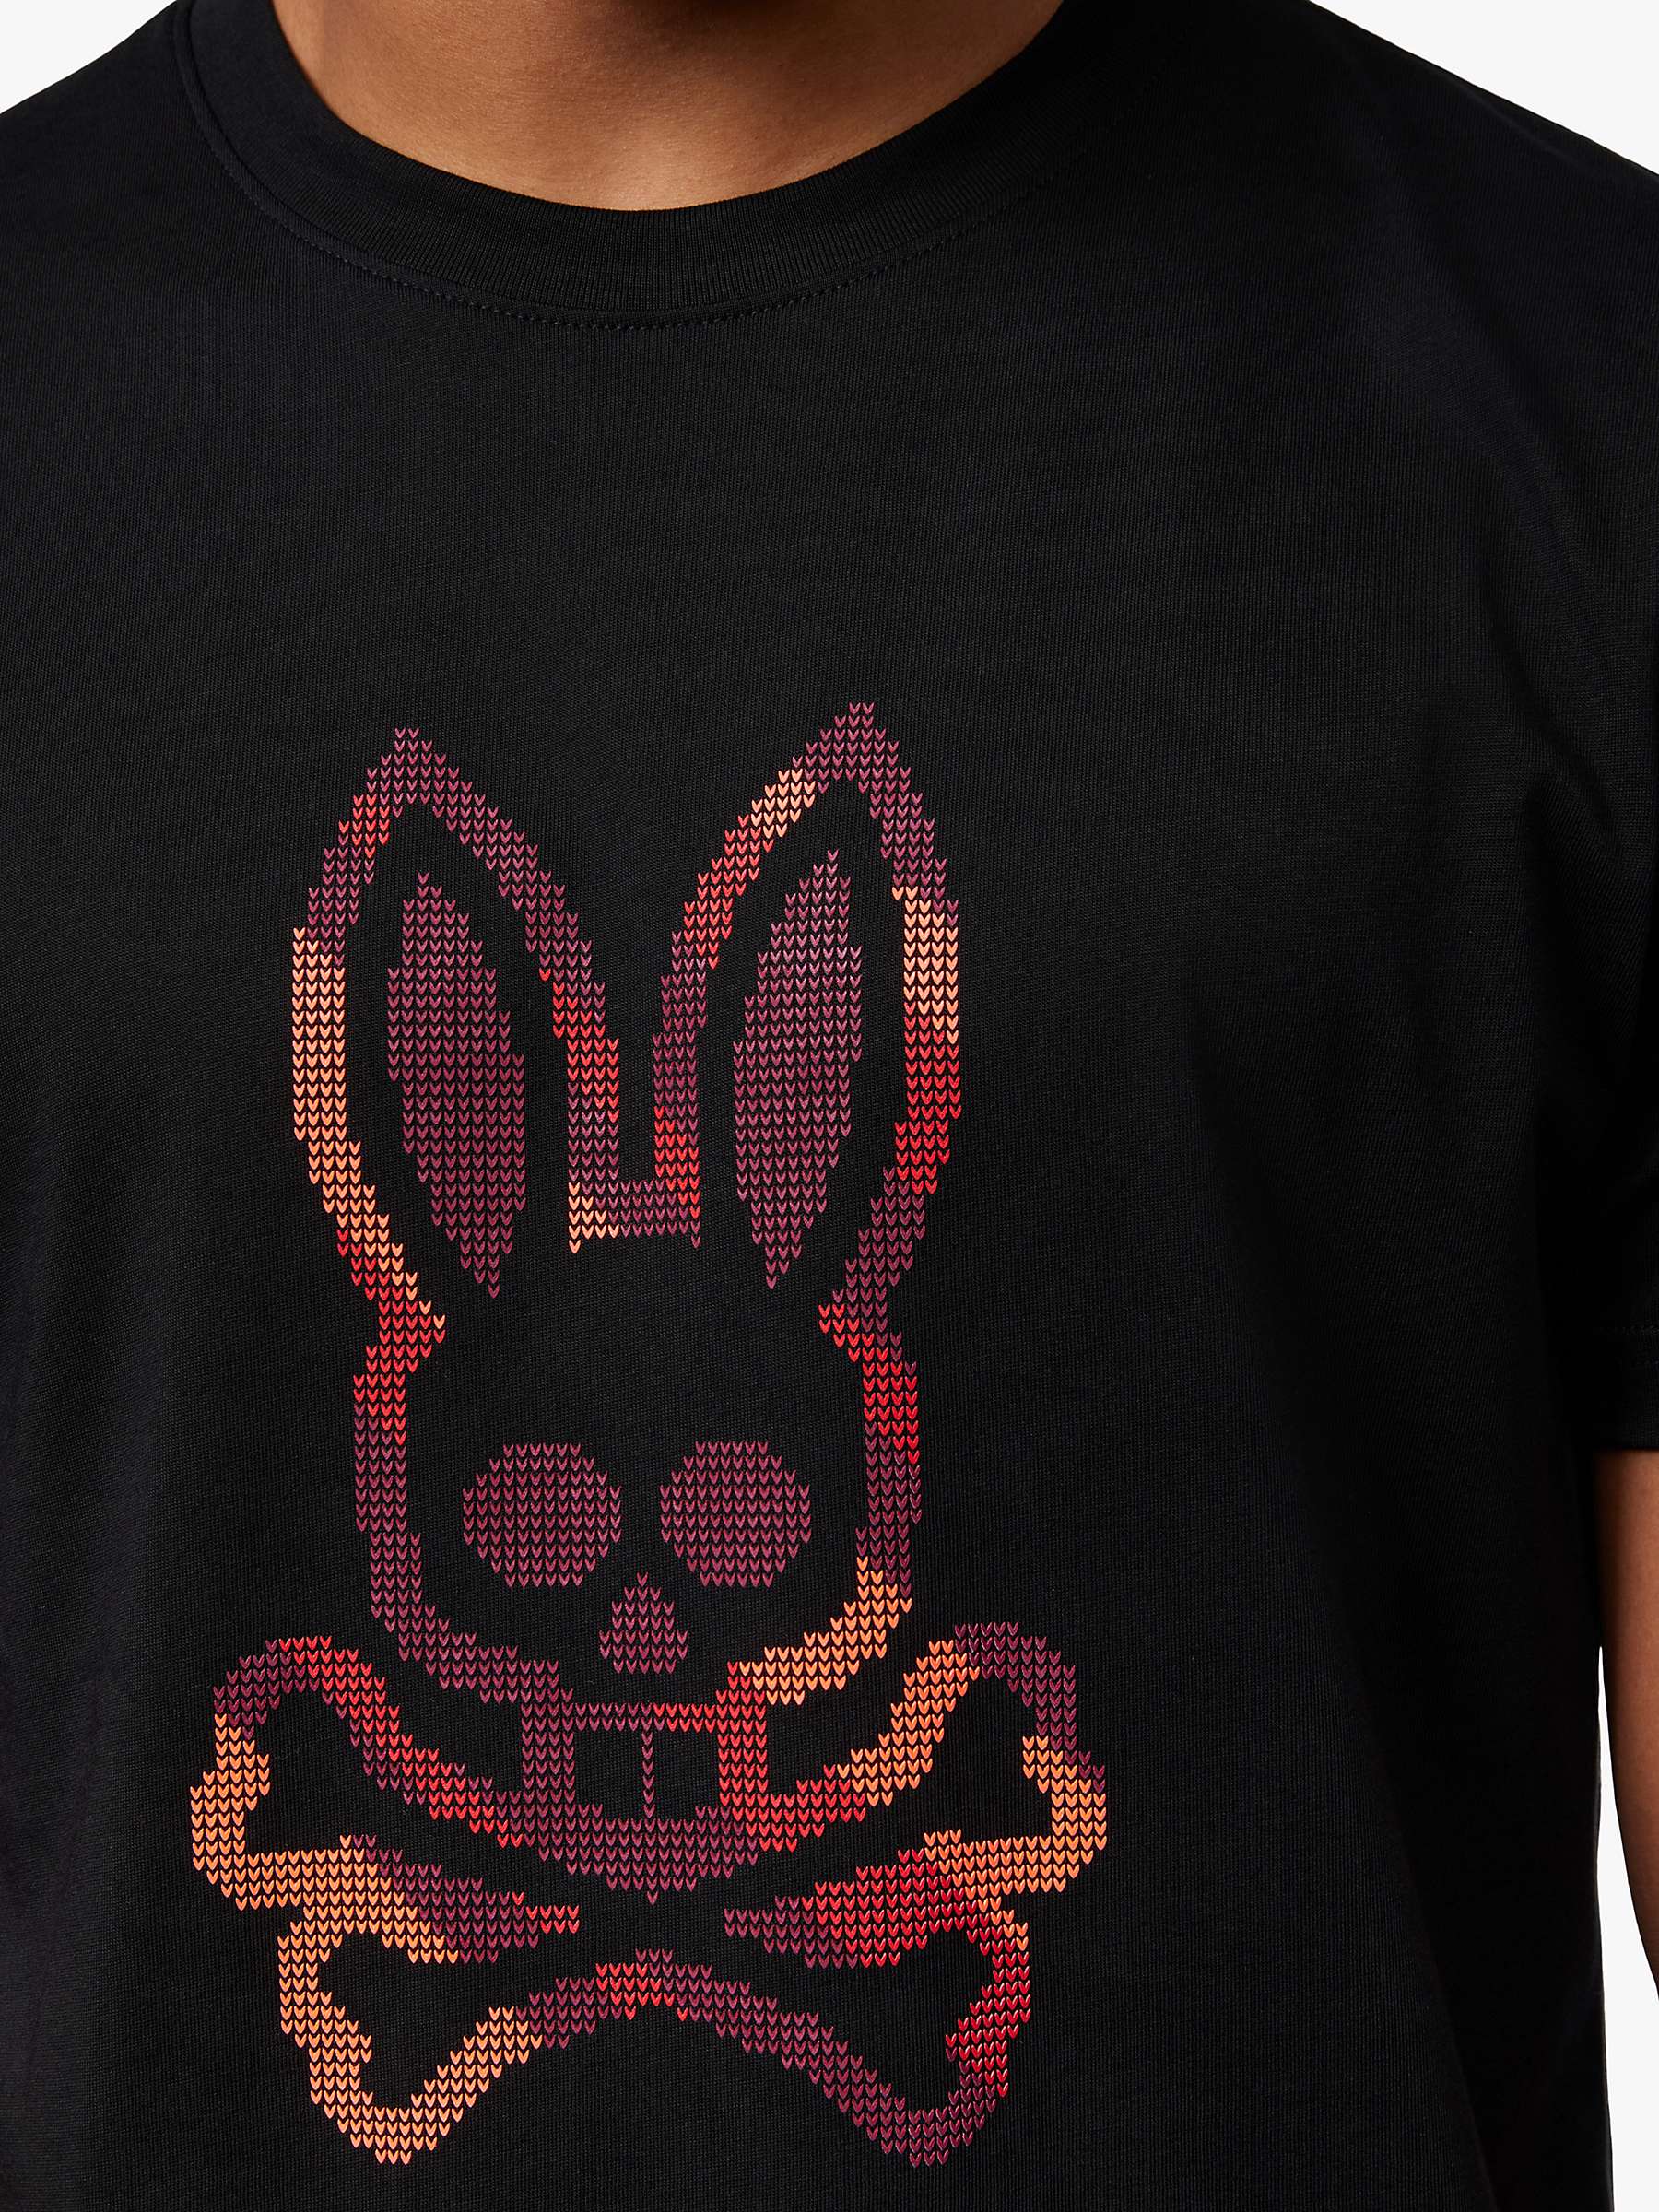 Buy Psycho Bunny Apple Valley Graphic T-Shirt, Black/Multi Online at johnlewis.com